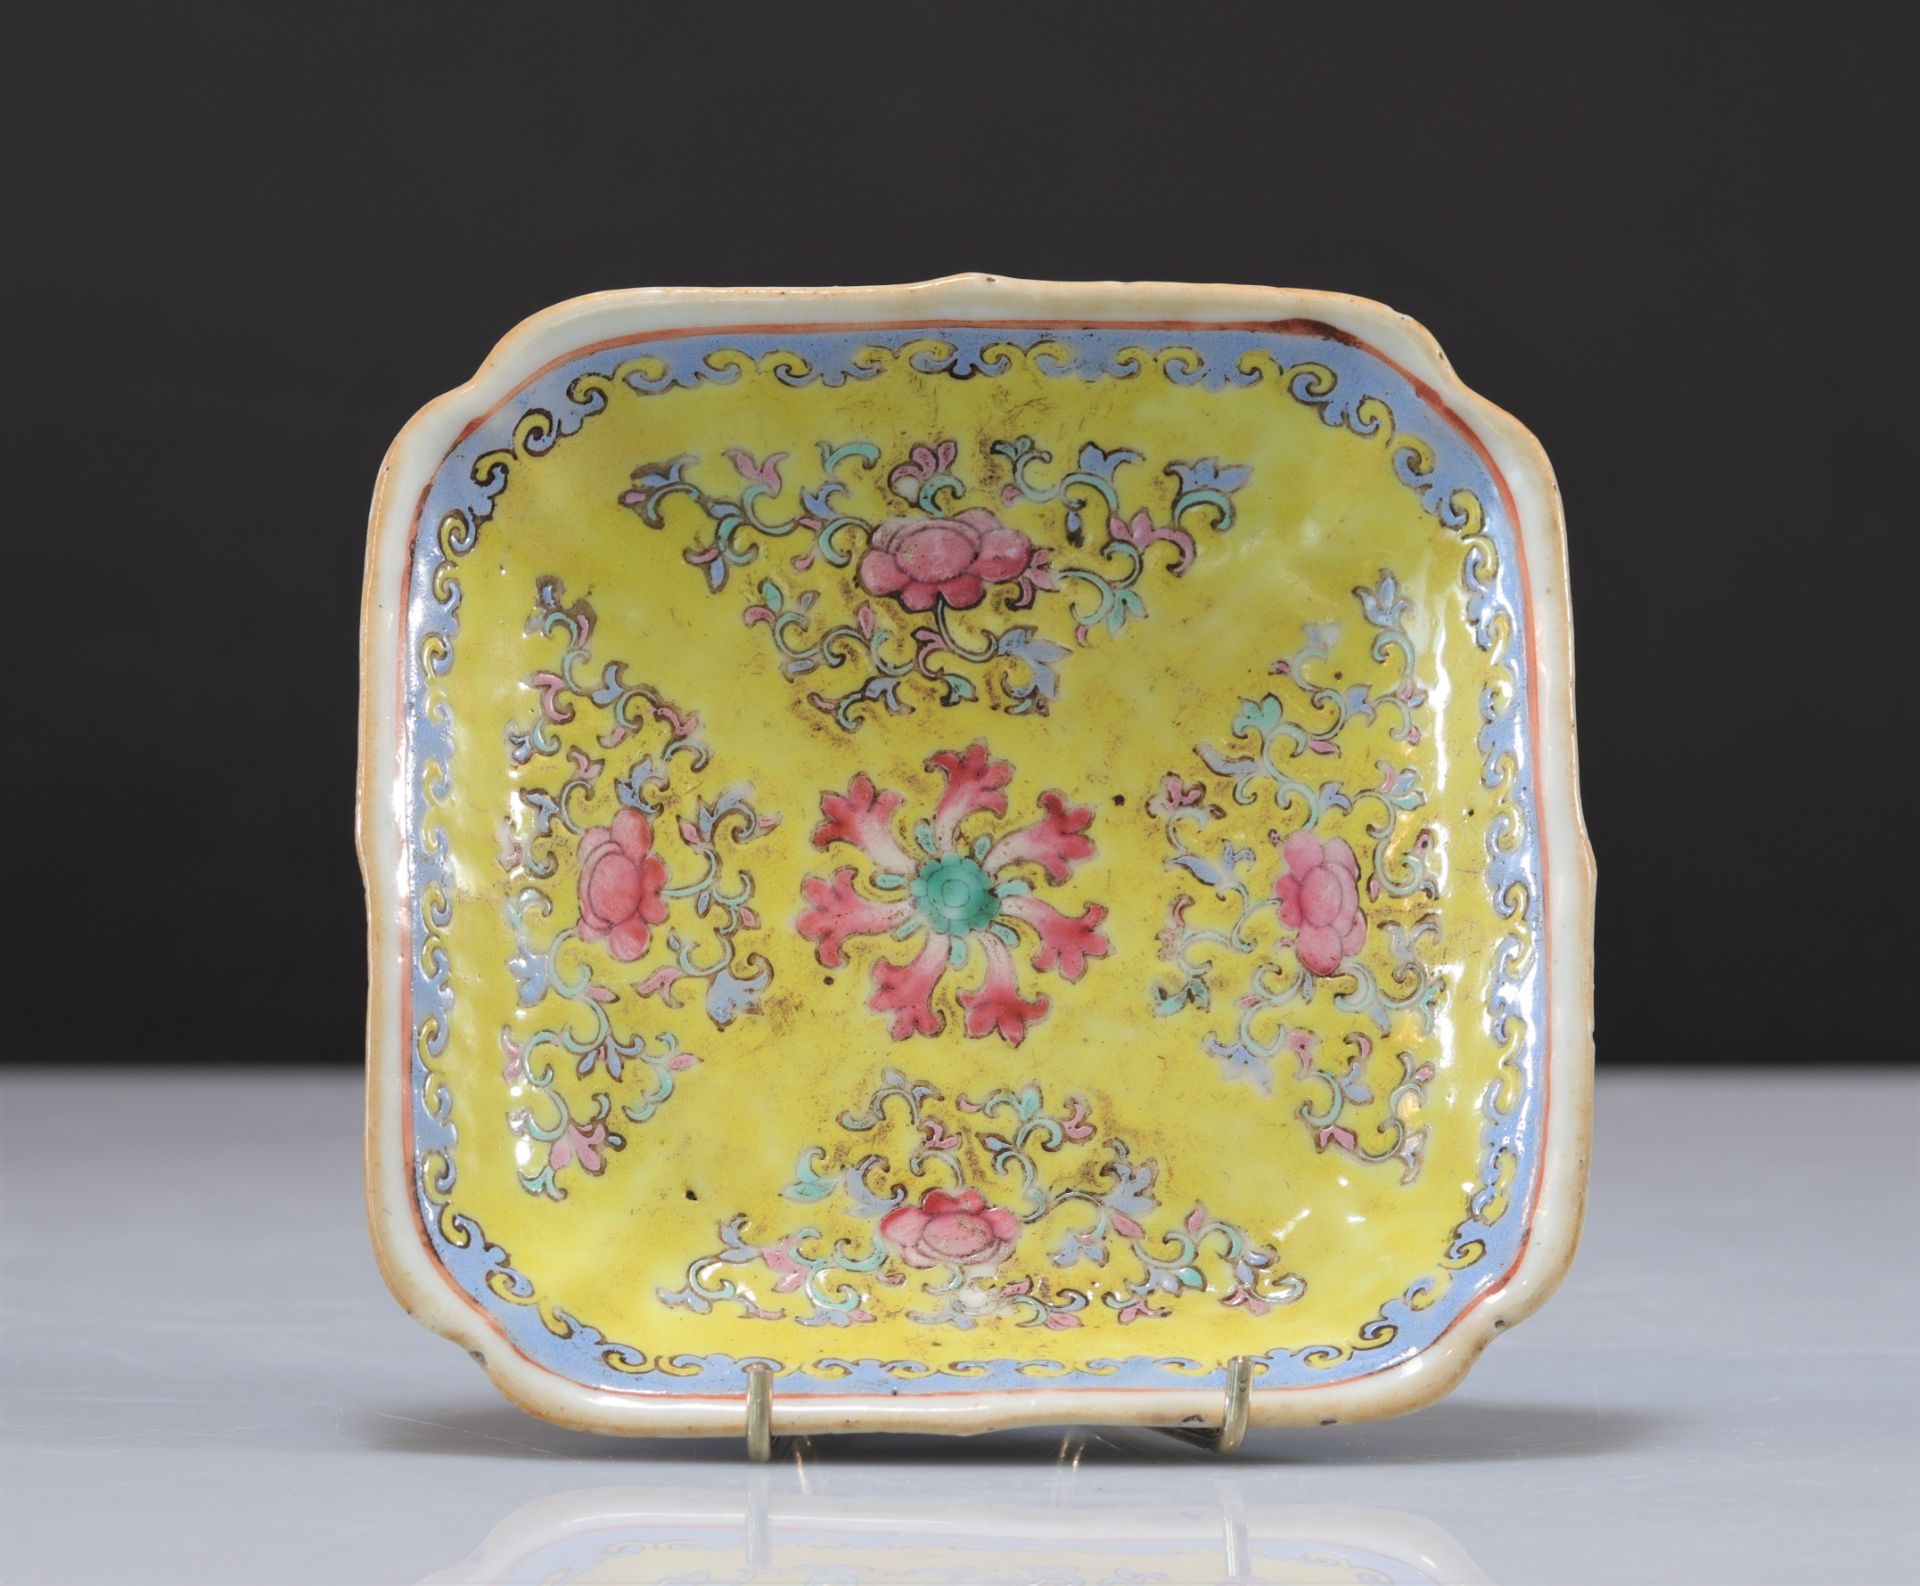 Famille rose porcelain dish with yellow background